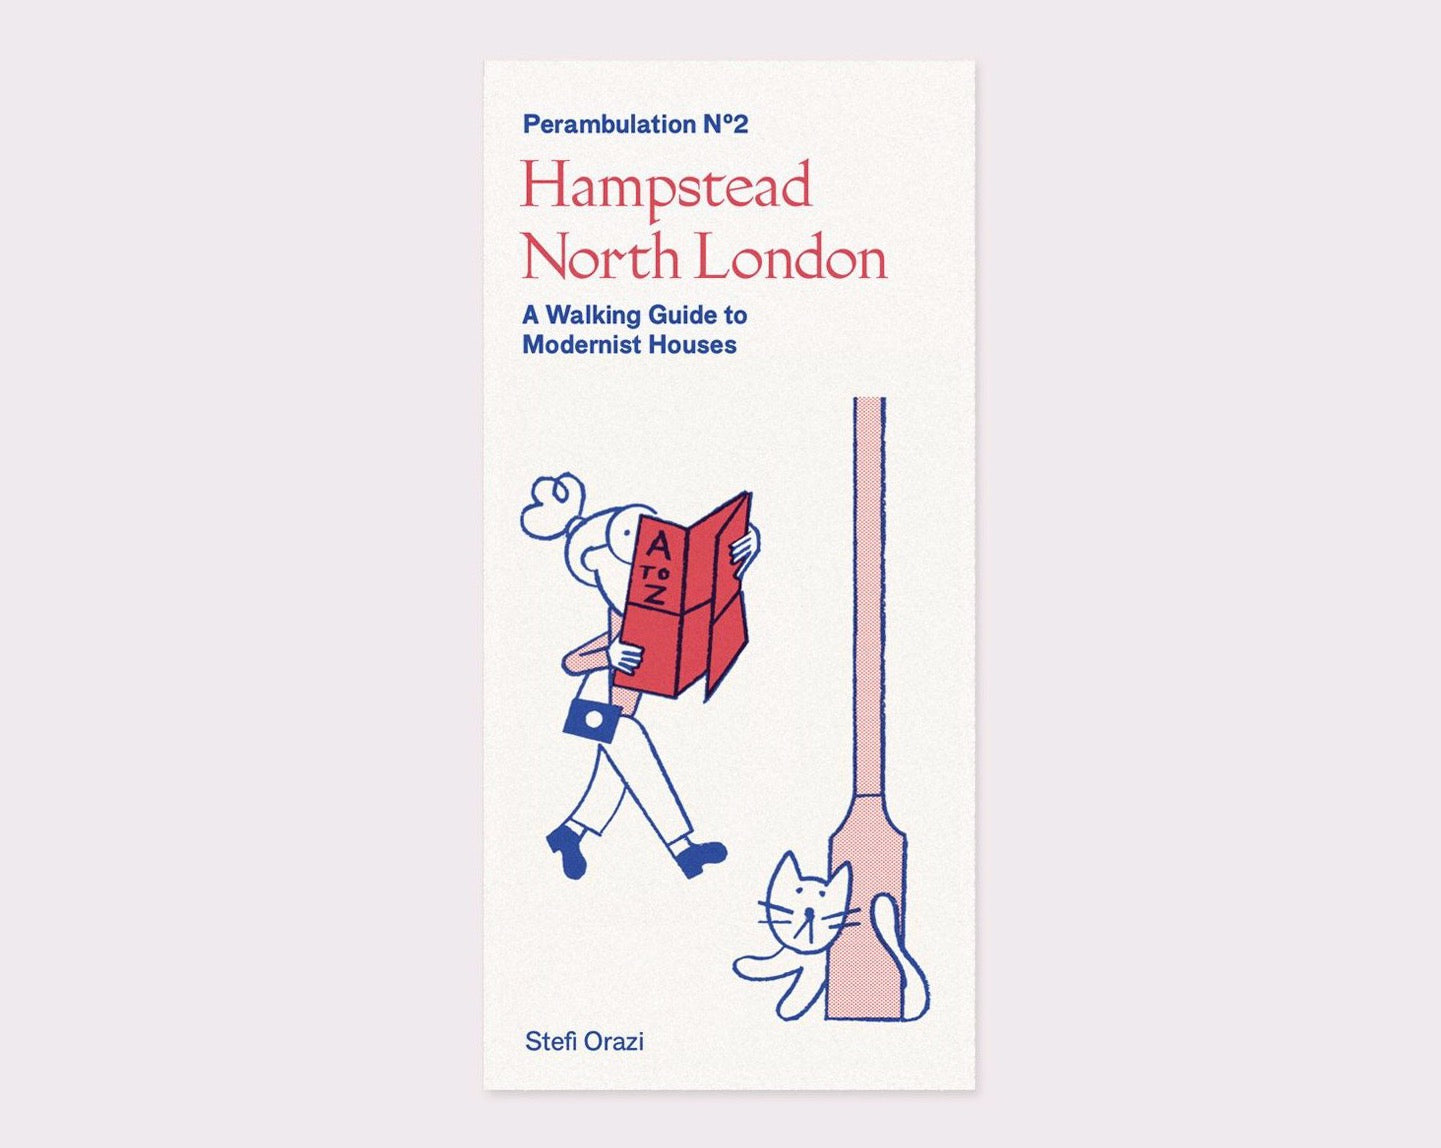 Perambulation Nº2—A Walking Guide to Modernist Houses in Hampstead North London by Stefi Orazi